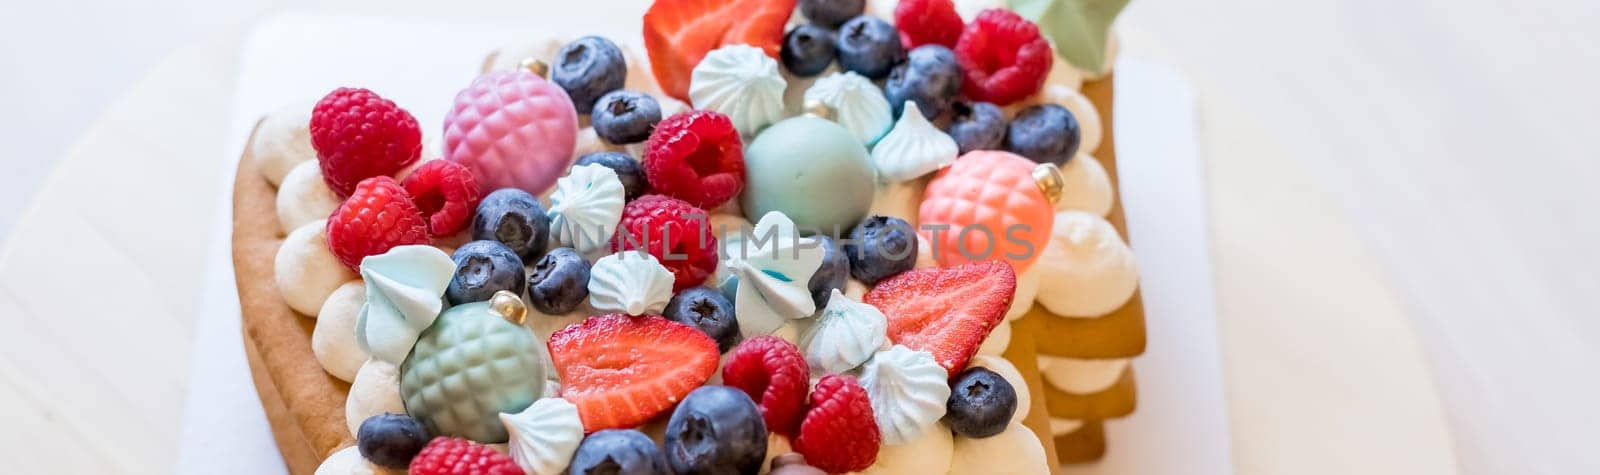 Homemade naked layered vanilla cake with whipped cream and fresh berries on top on a gray concrete background. Summer cake. Copy space